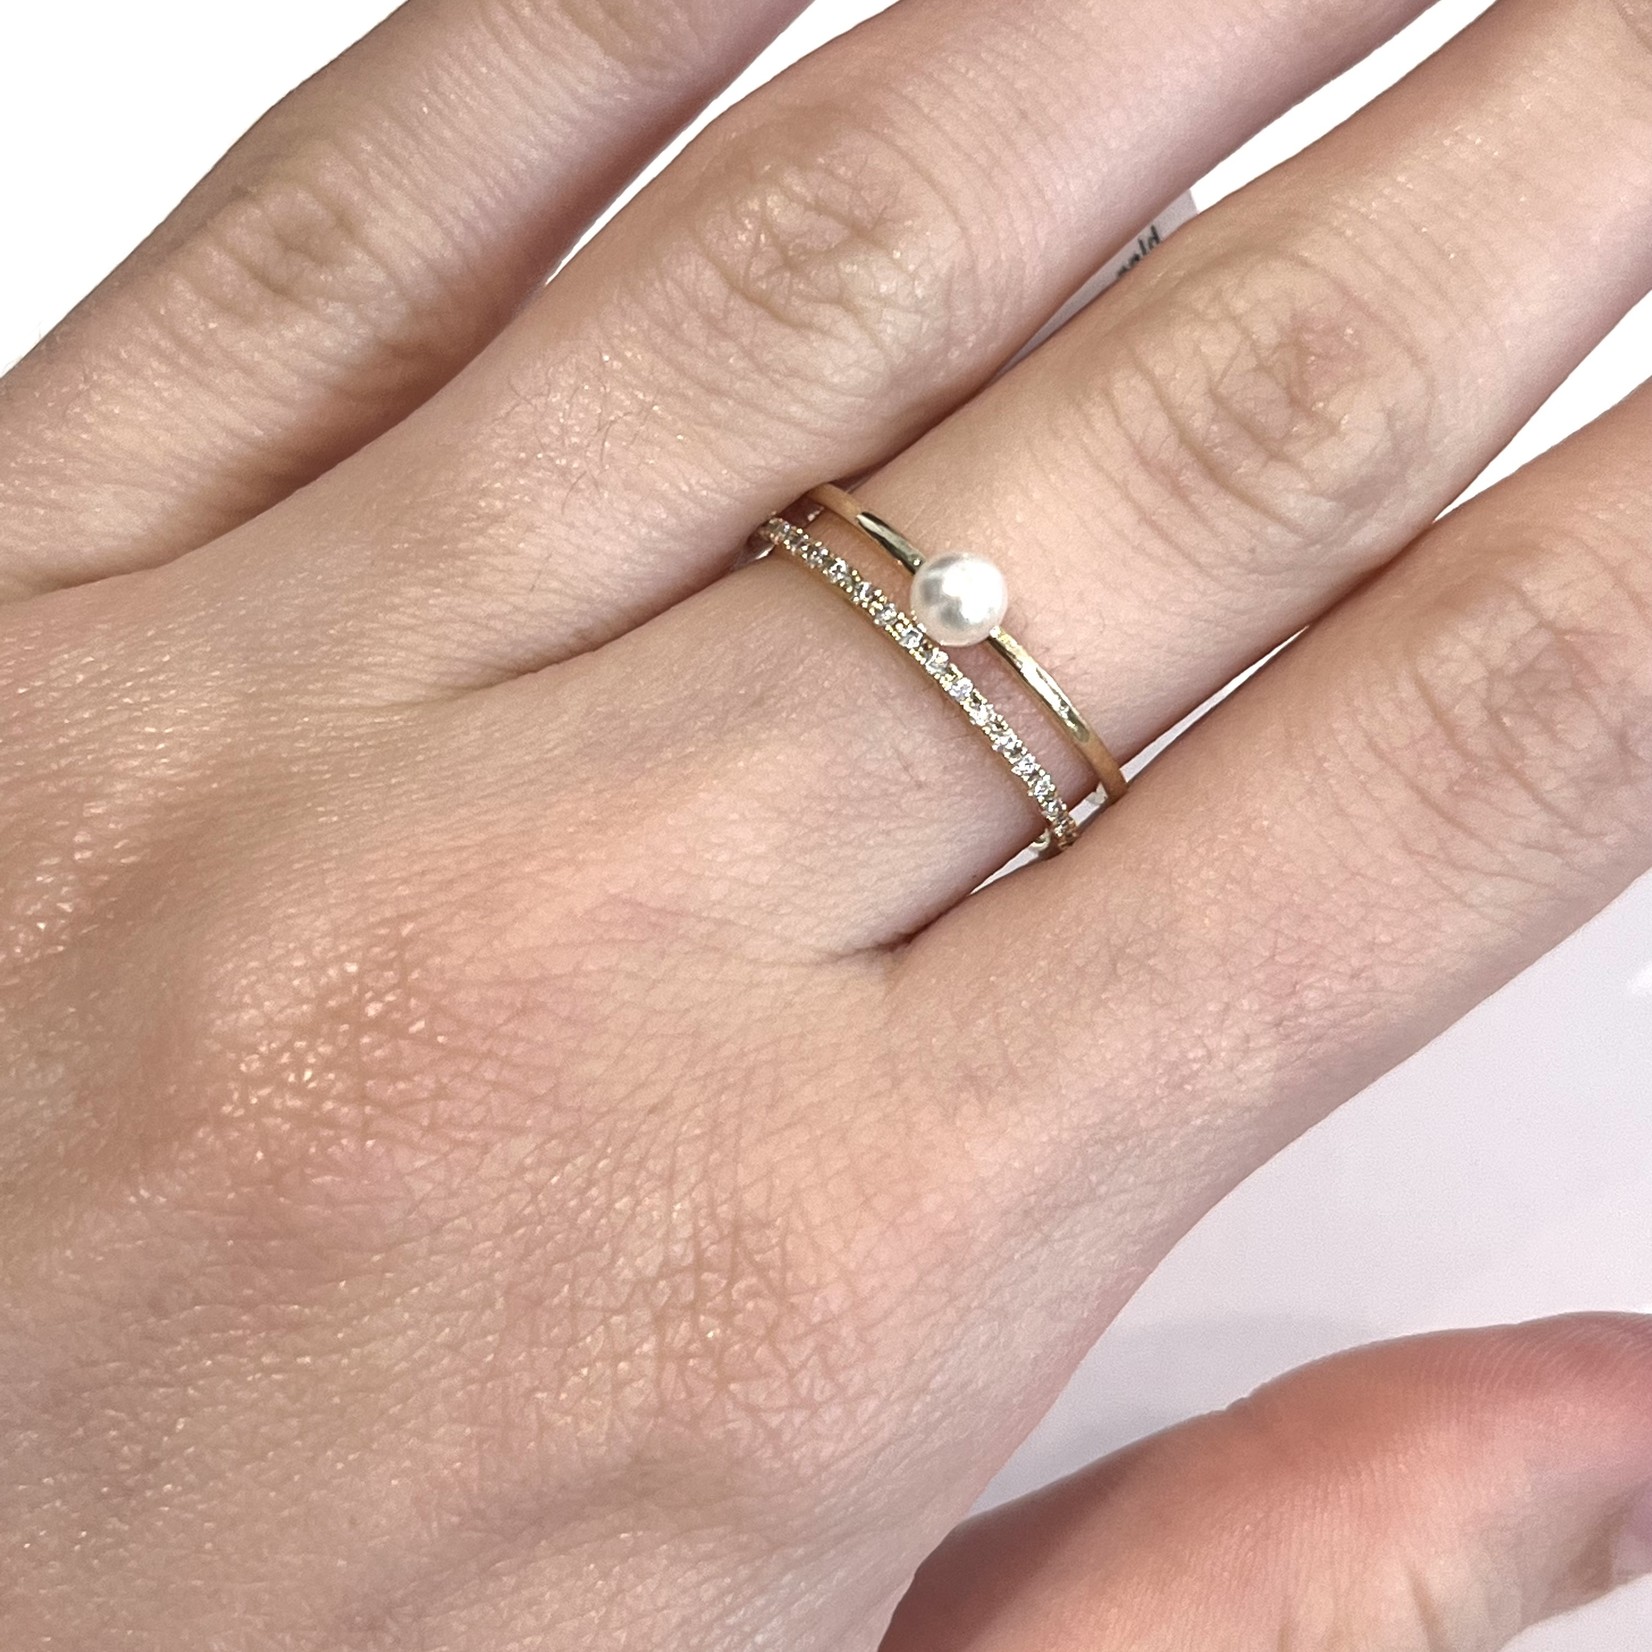 Dainty 2 layer gold ring w/ single pearl & CZ band